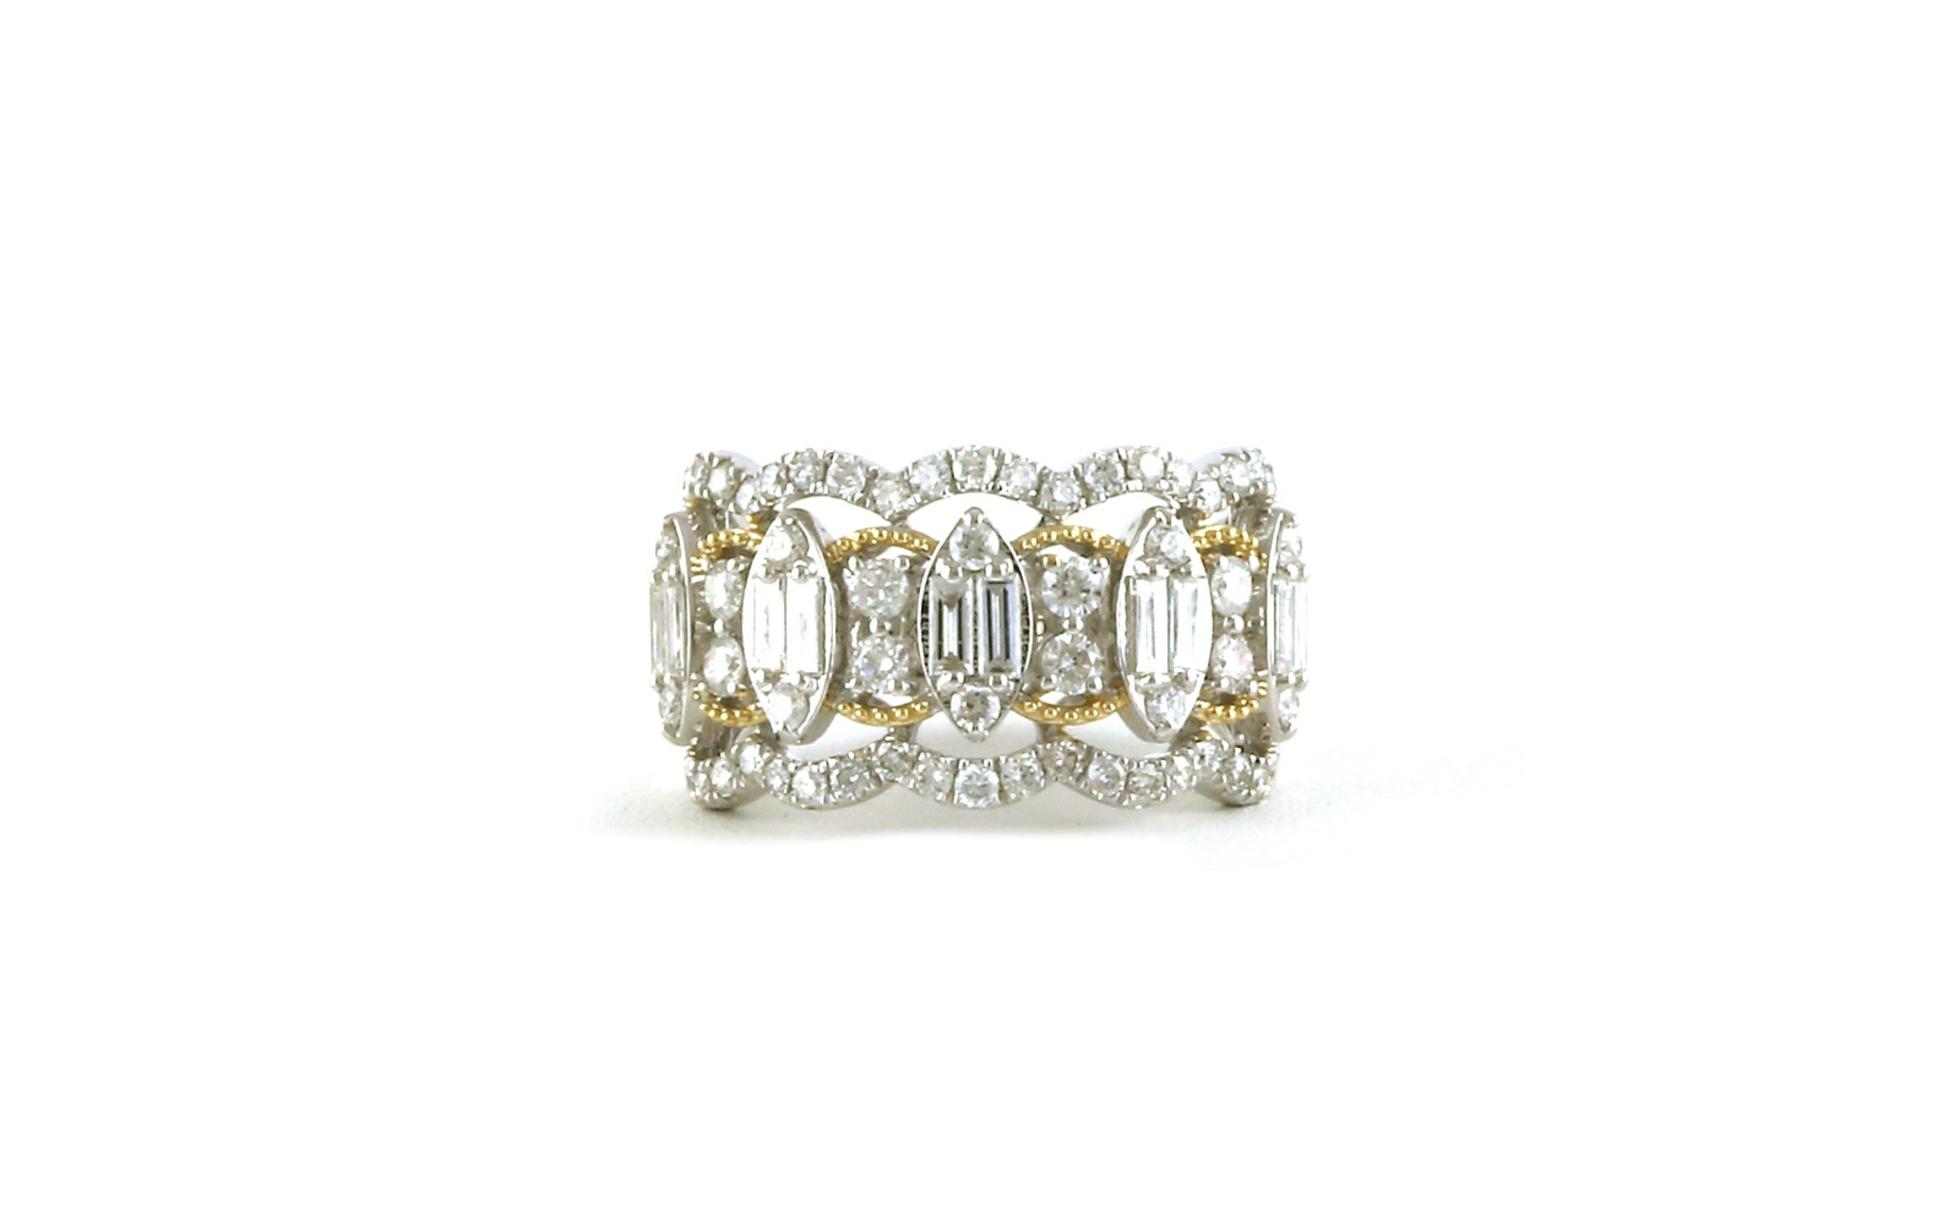 Wide Filigree Diamond Cluster Ring in Two-tone Yellow, and White Gold (2.03cts TWT)